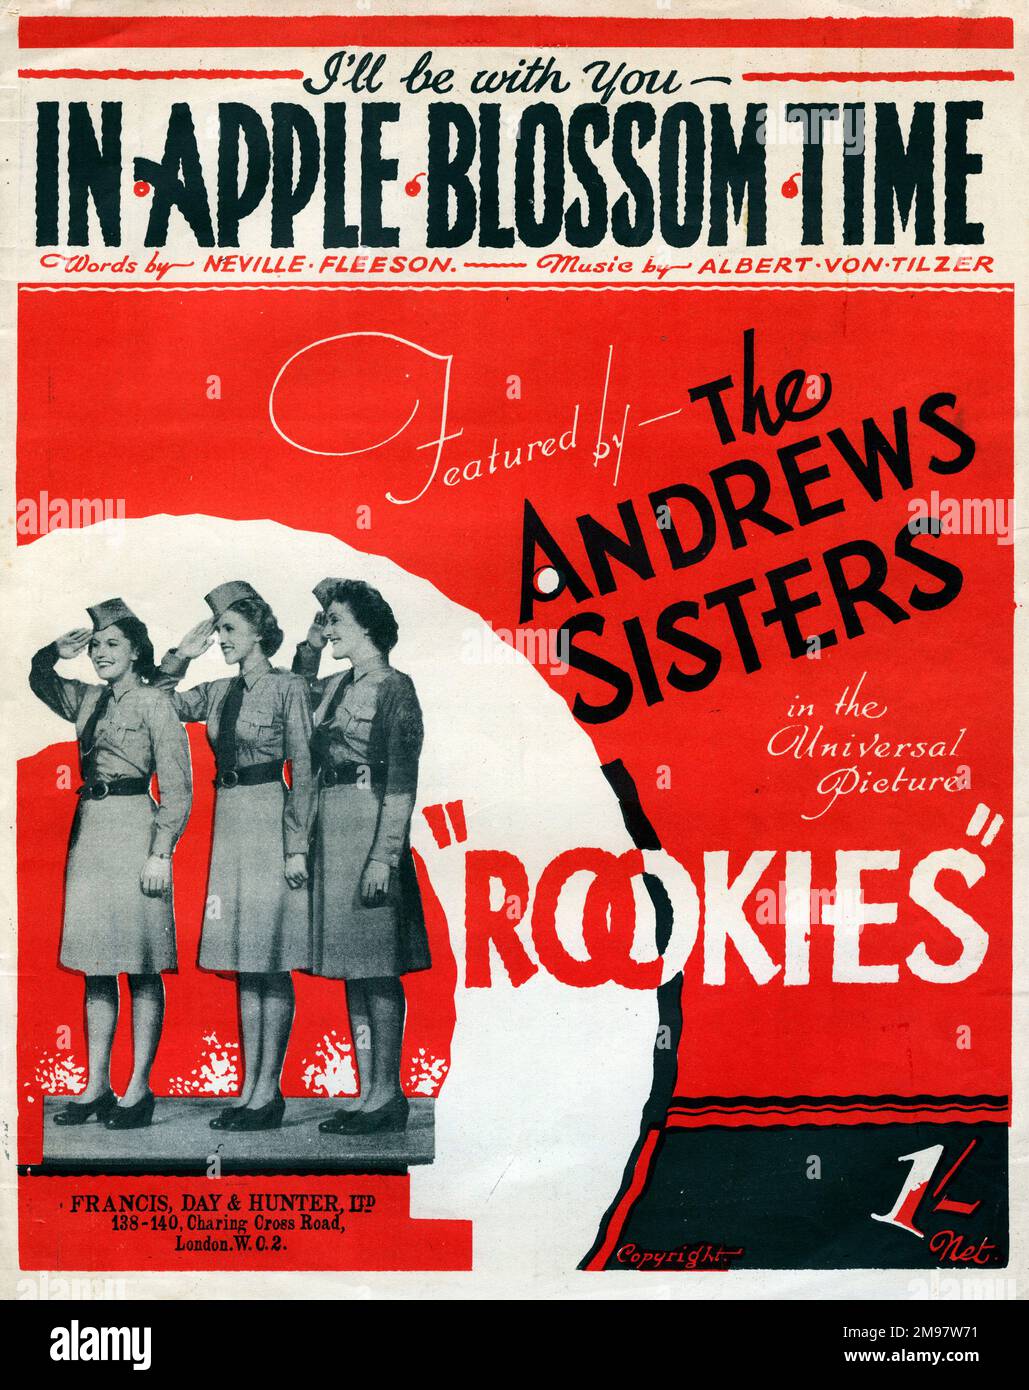 Music cover, I'll be with you in Apple Blossom Time, sung by The Andrews Sisters in the Universal Picture, Rookies. Stock Photo